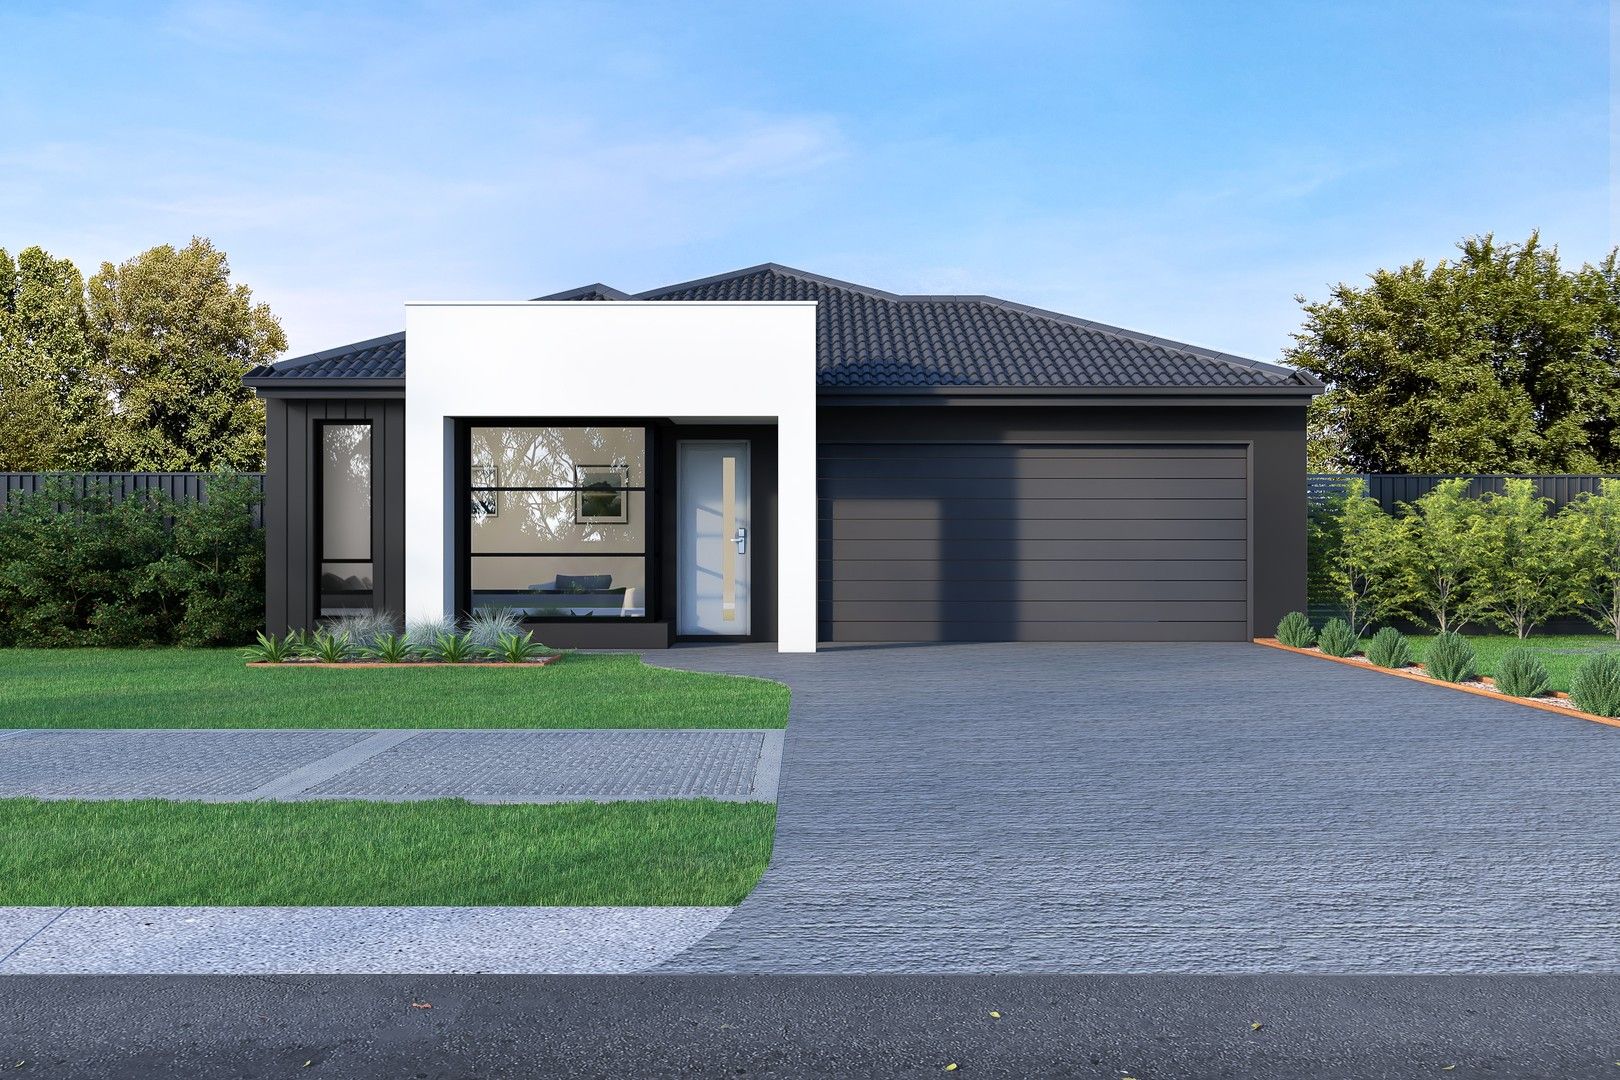 4 bedrooms New House & Land in 7 Slinky Street DEANSIDE VIC, 3336